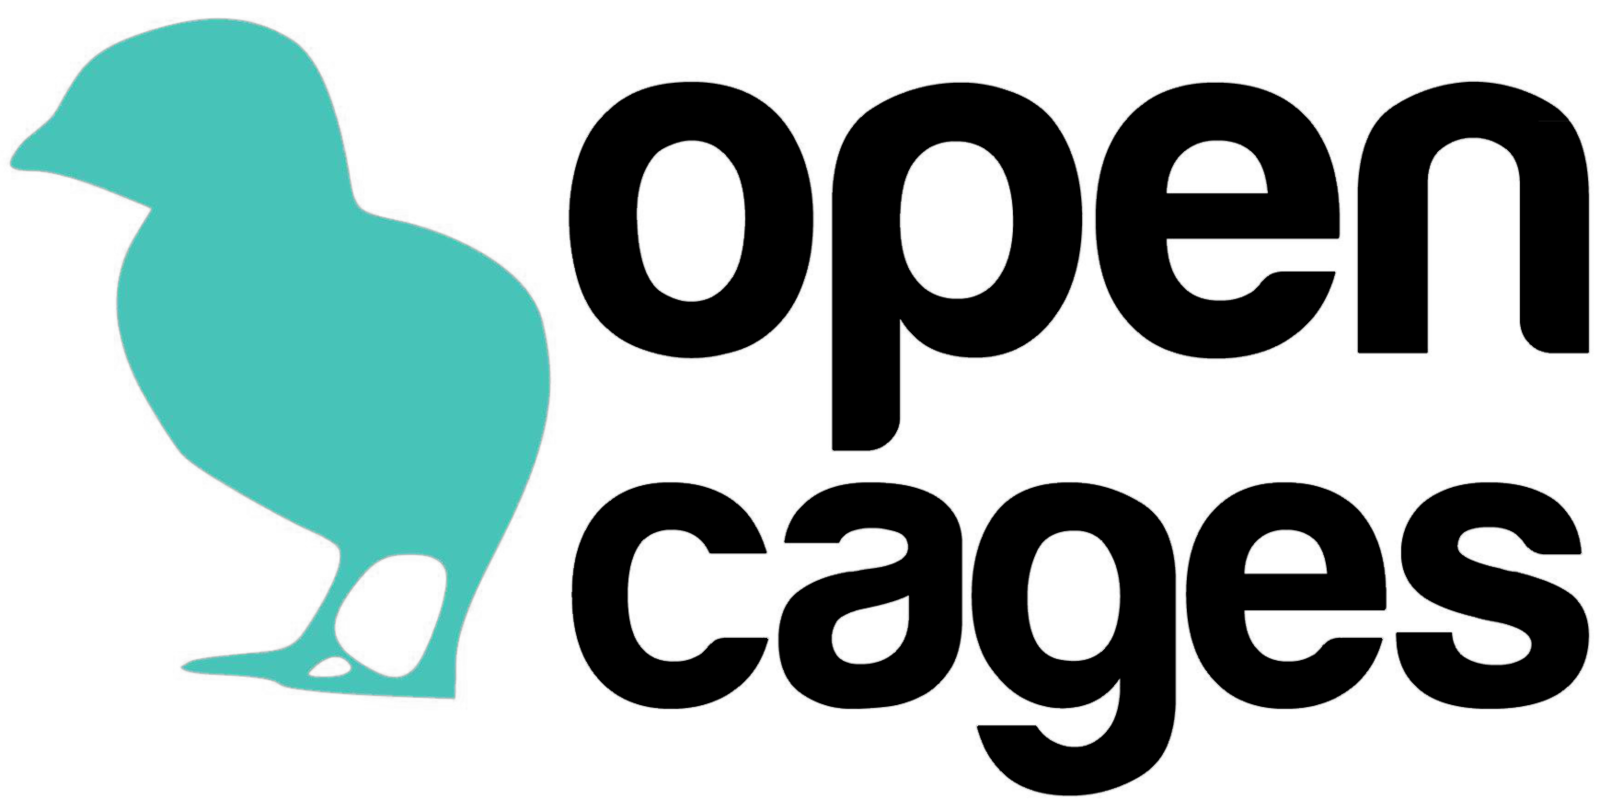 Open Cages logo